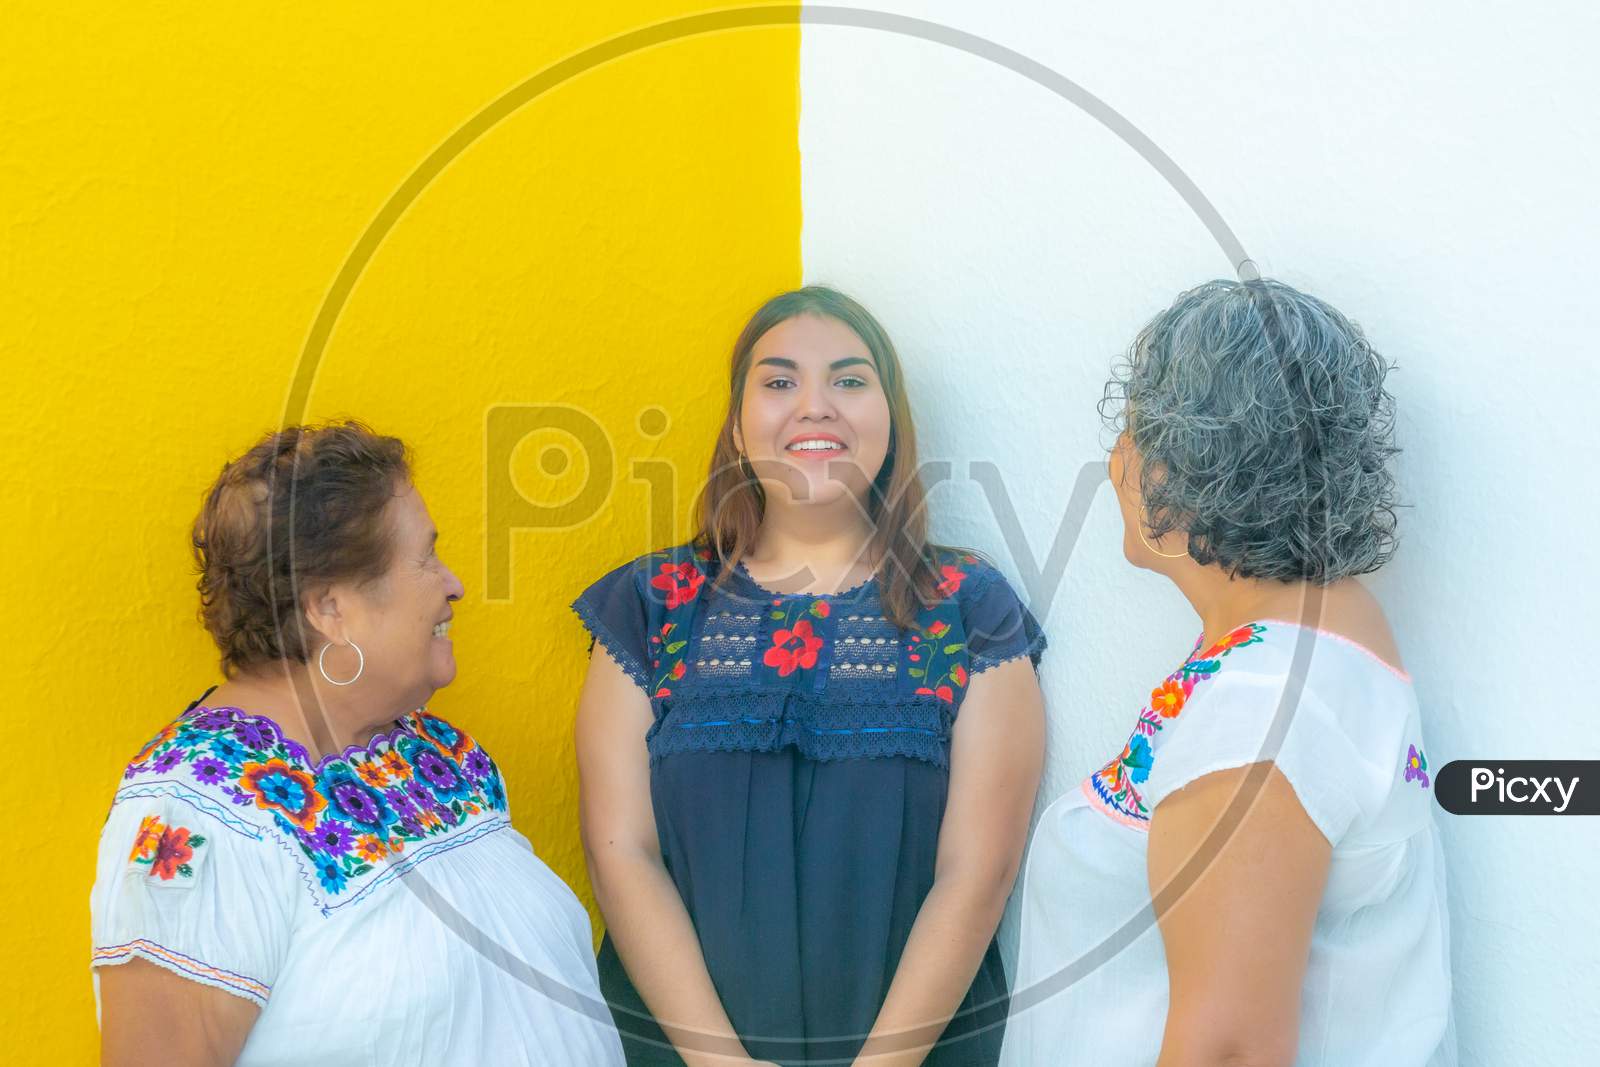 Mother And Grandmother Looking At The Very Cheerful Granddaughter, Three Generations Of Mexican Women Smiling With Floral Print Blouses On A White And Yellow Background